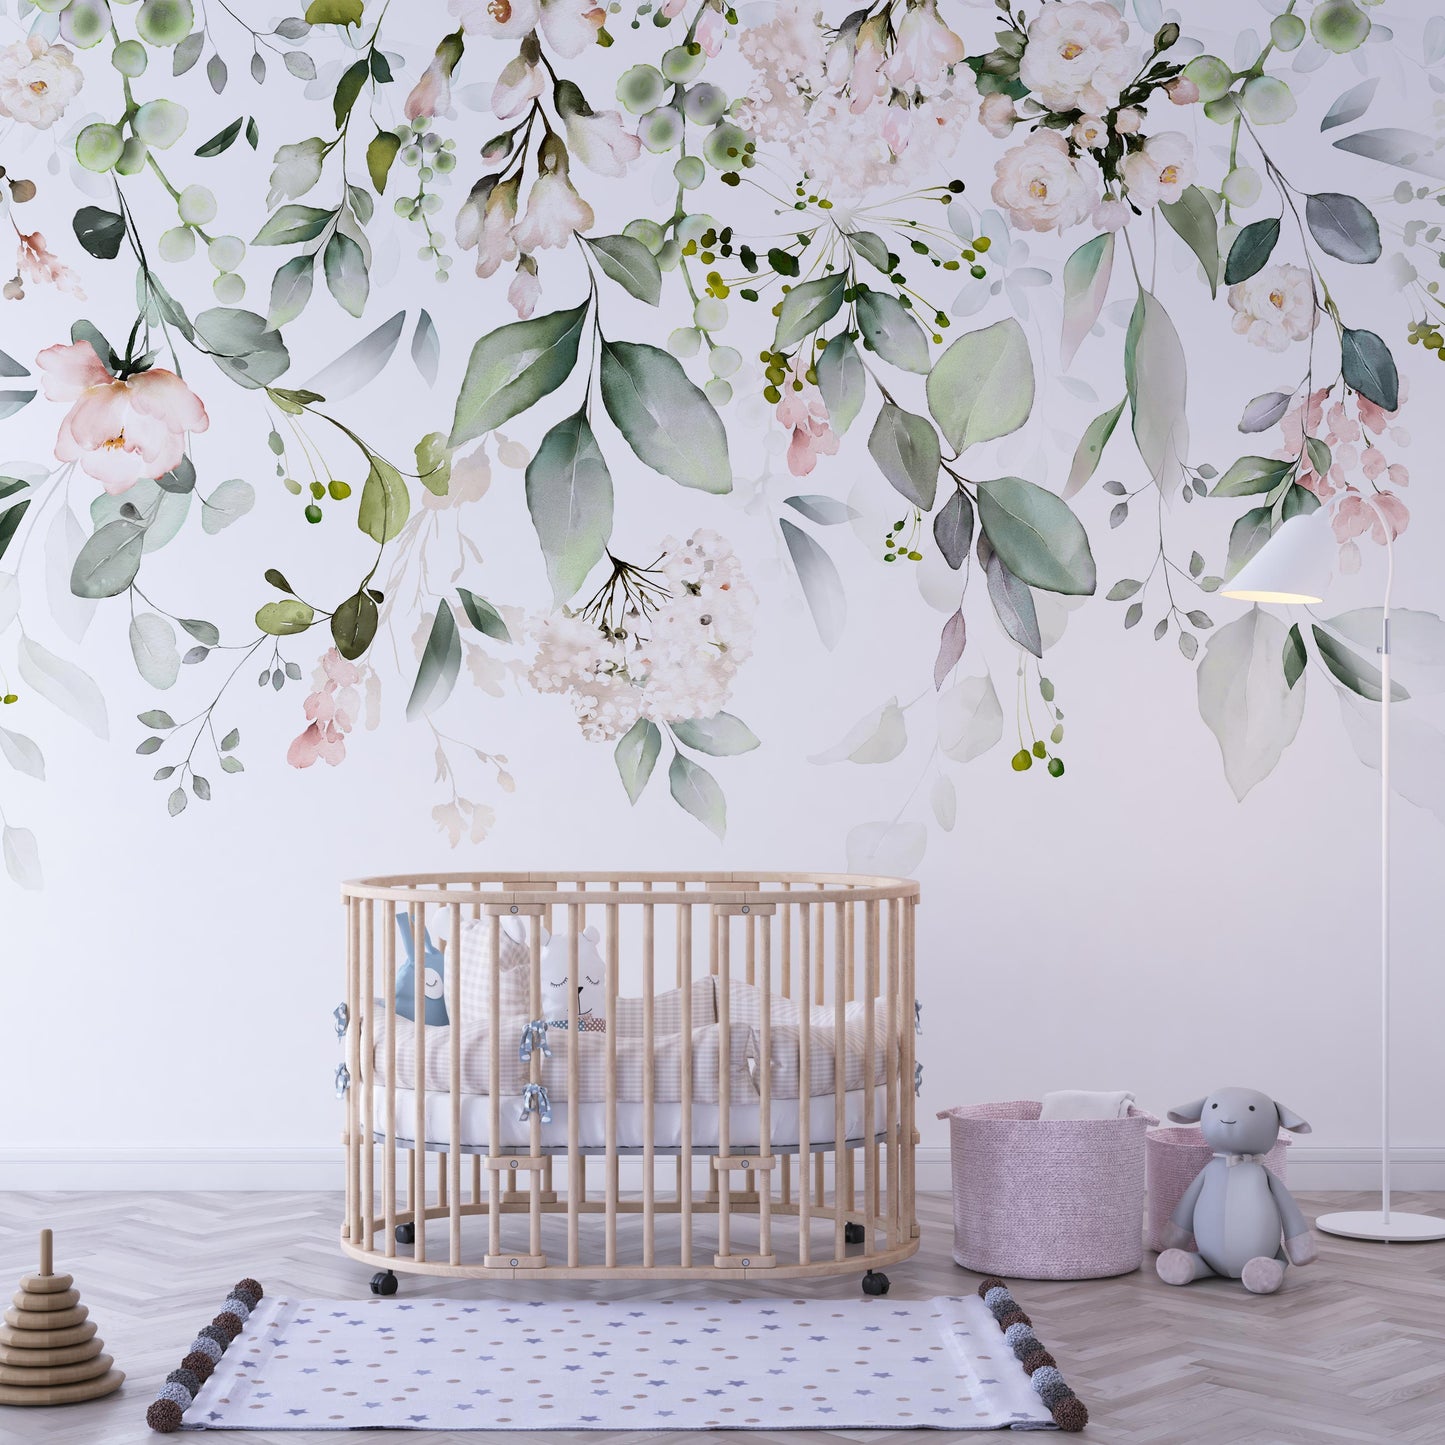 Minimalist Nursery with Round Wooden Crib:  Removable sage green botanical mural accentuates minimalist nursery with round wooden crib.